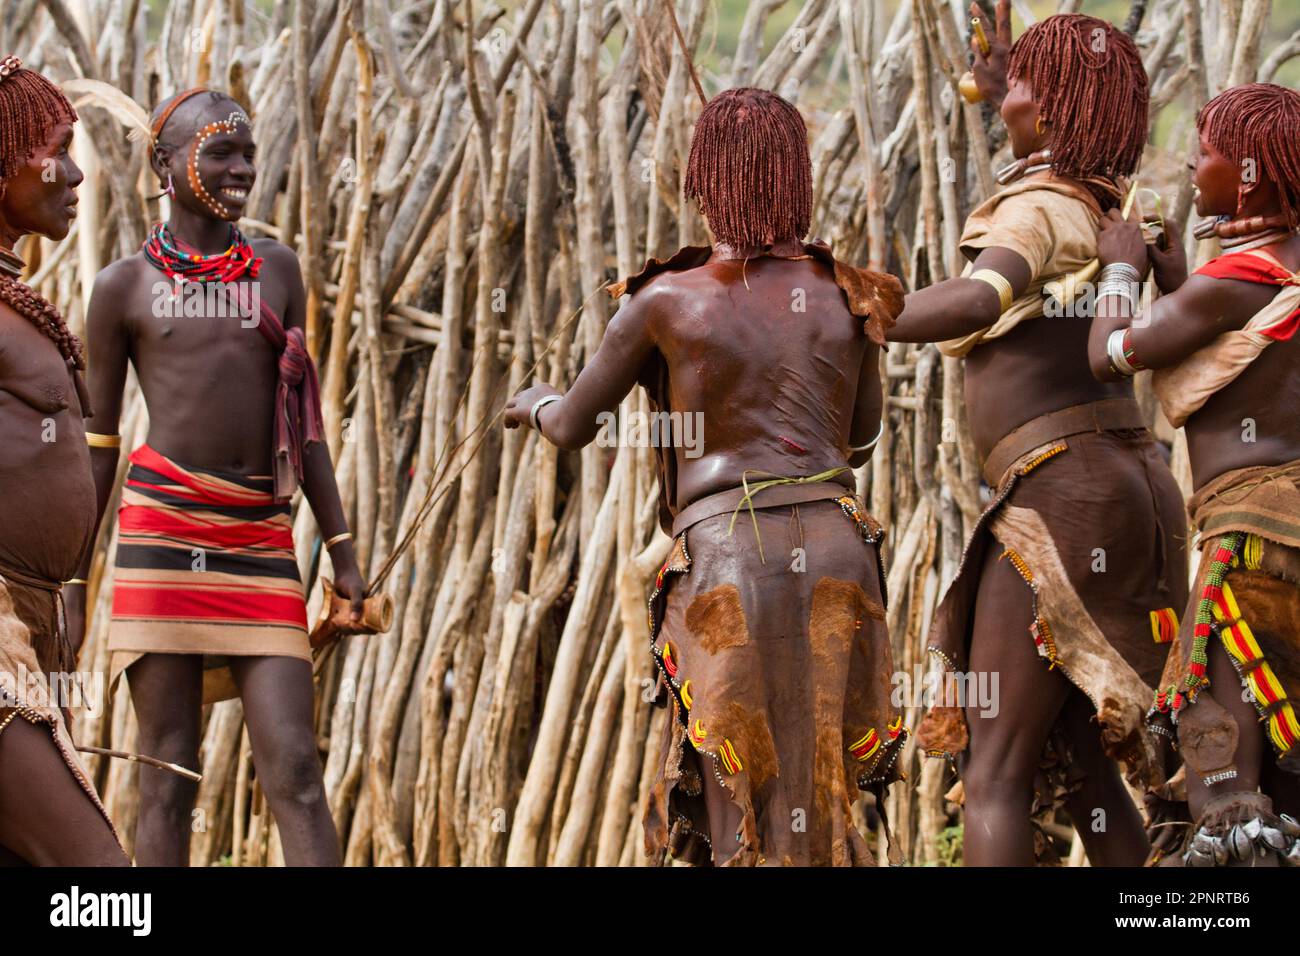 A Hamar woman being whipped by a man at a 'Jumping of the Bull' ceremony.  The semi-nomadic Hamar of Southwest Ethiopia Stock Photo - Alamy